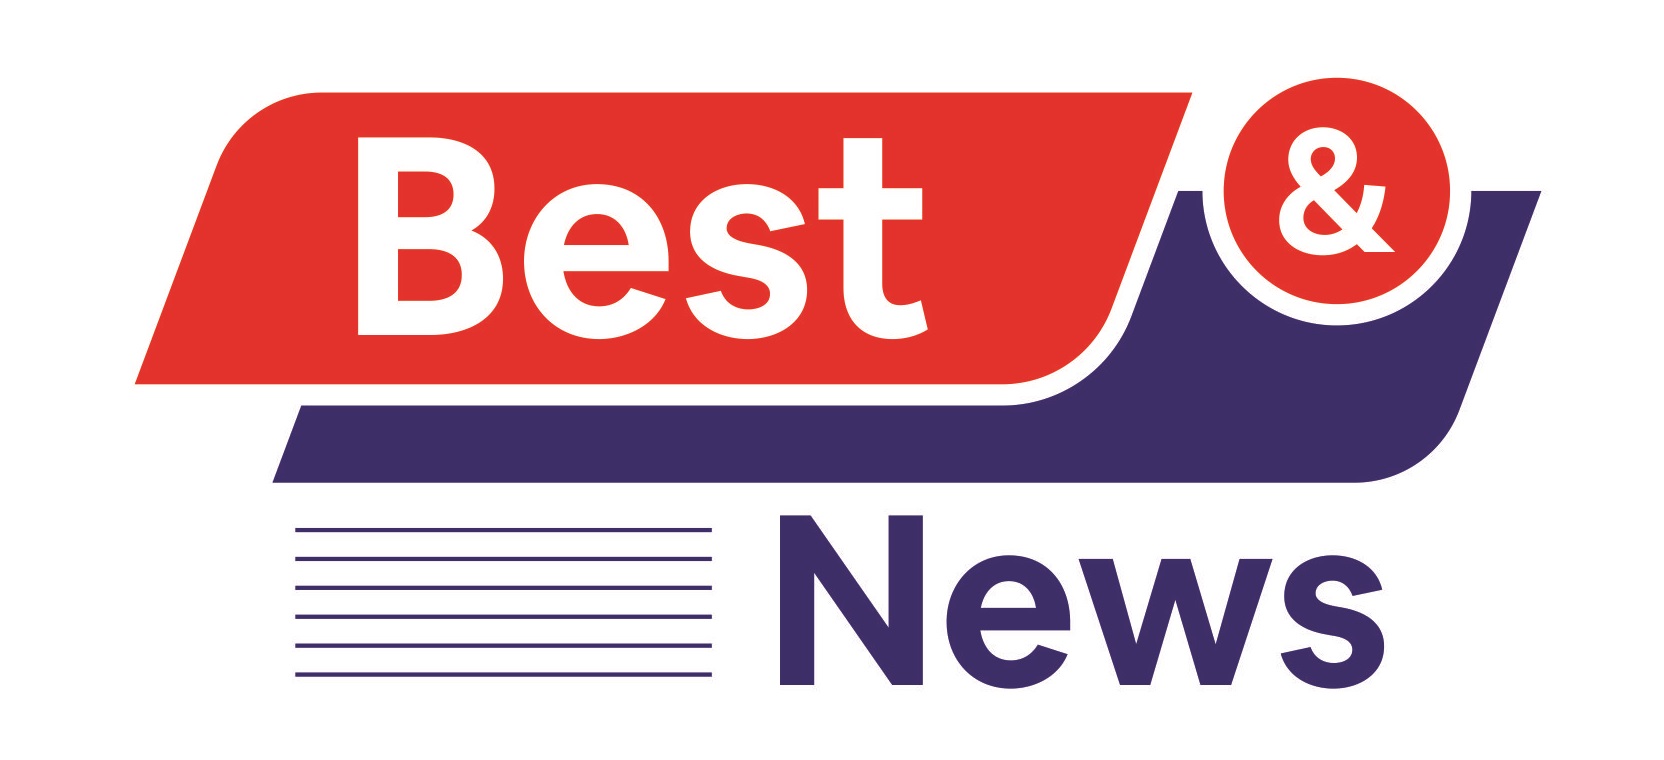 Best and News